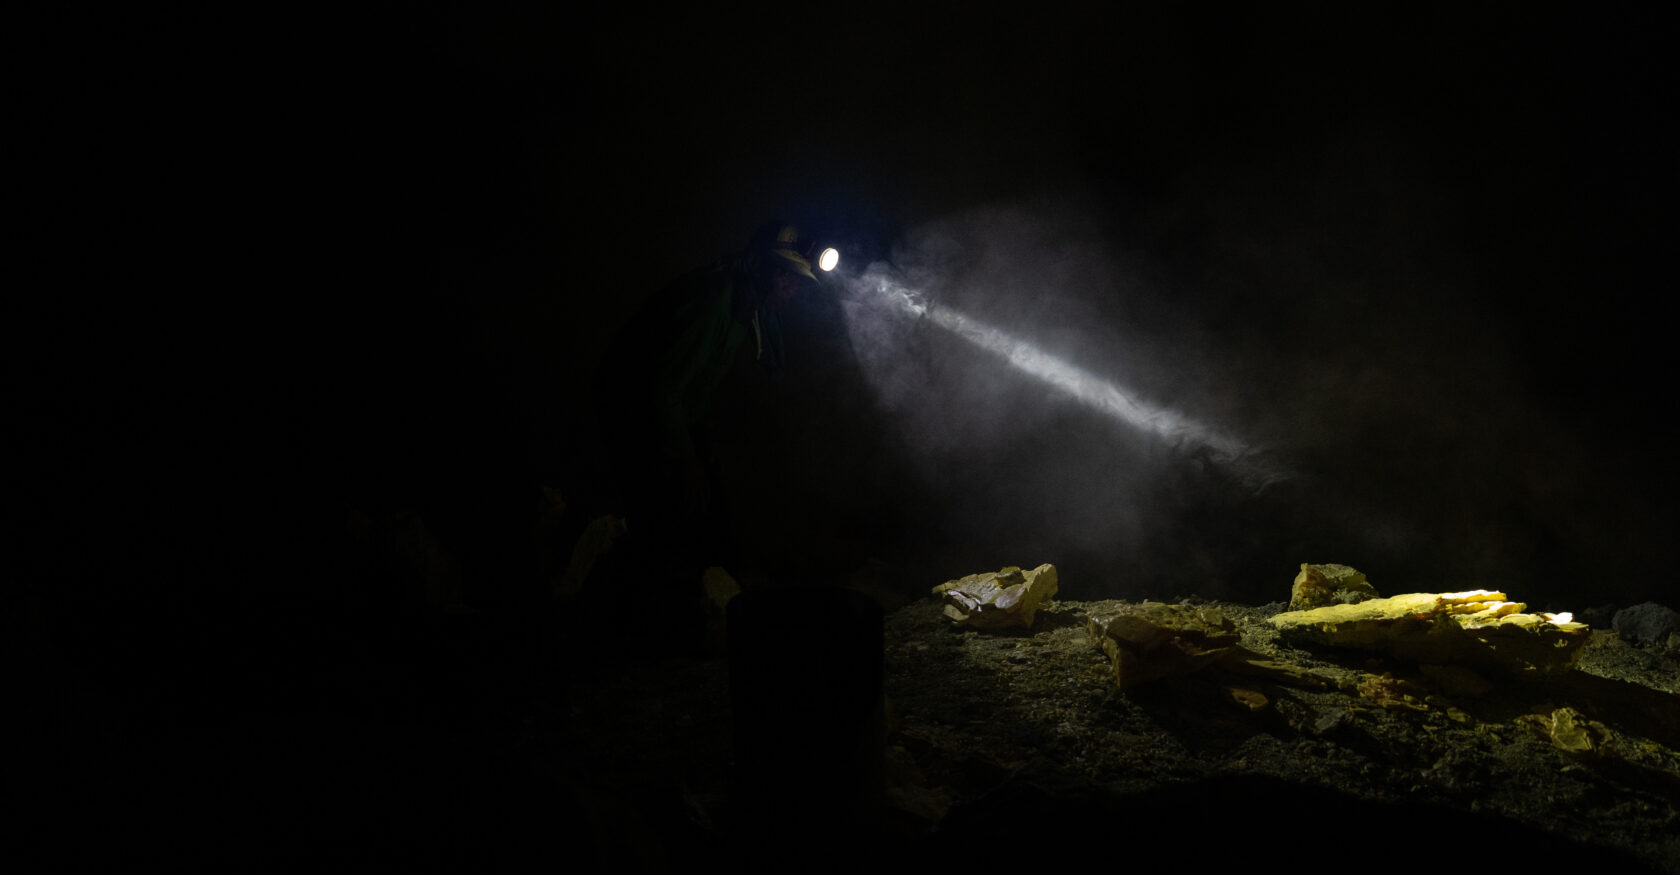 Meanwhile, a miner prepares to haul his sulfur haul out of the crater (Alexandros Zilos)